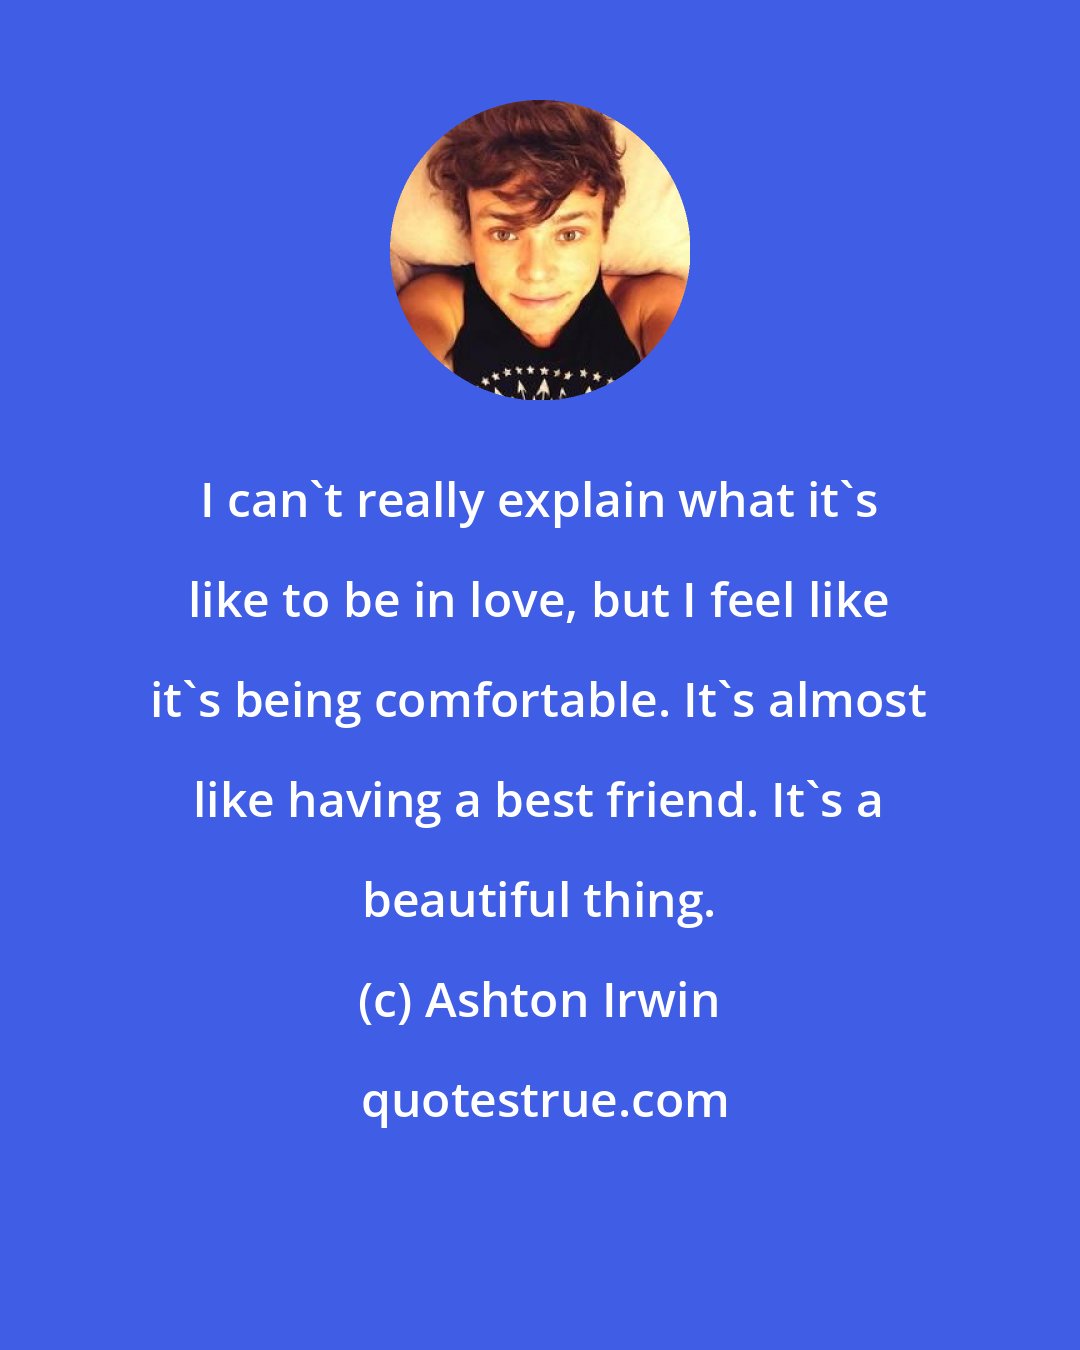 Ashton Irwin: I can't really explain what it's like to be in love, but I feel like it's being comfortable. It's almost like having a best friend. It's a beautiful thing.